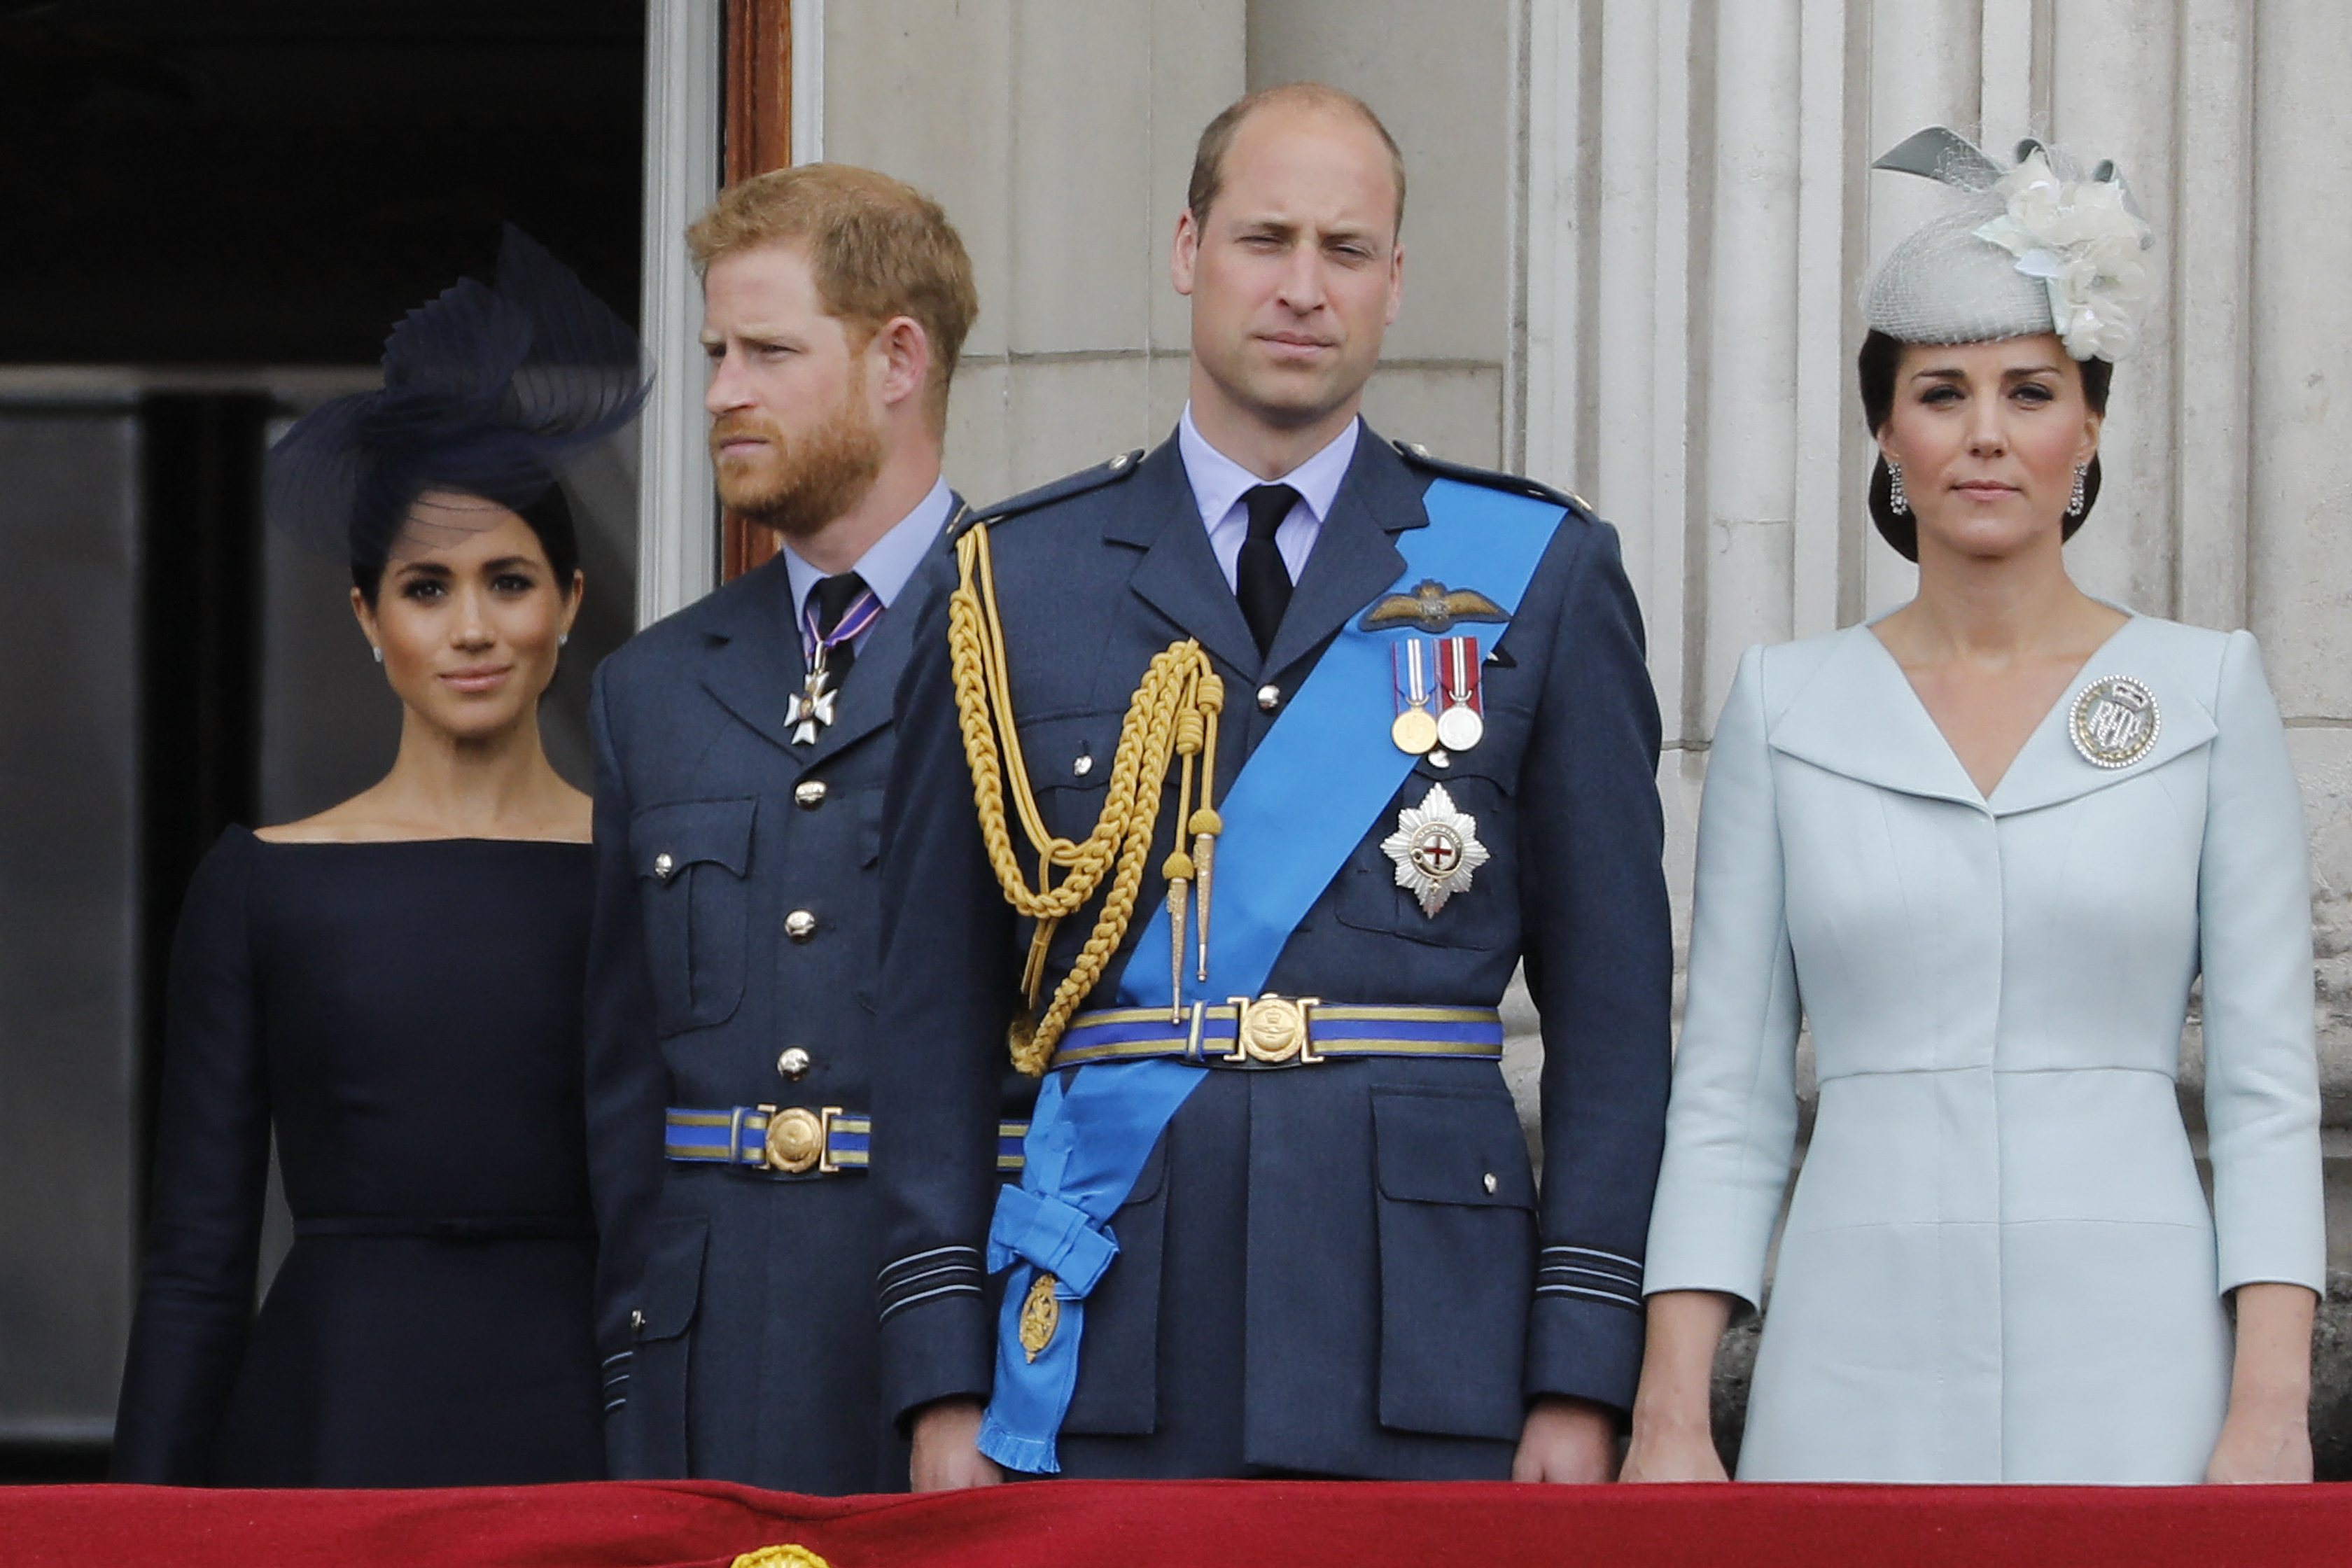 There's plenty of concern that Meghan and Harry's interview with Oprah could damage the monarchy for good. (TOLGA AKMEN / AFP)